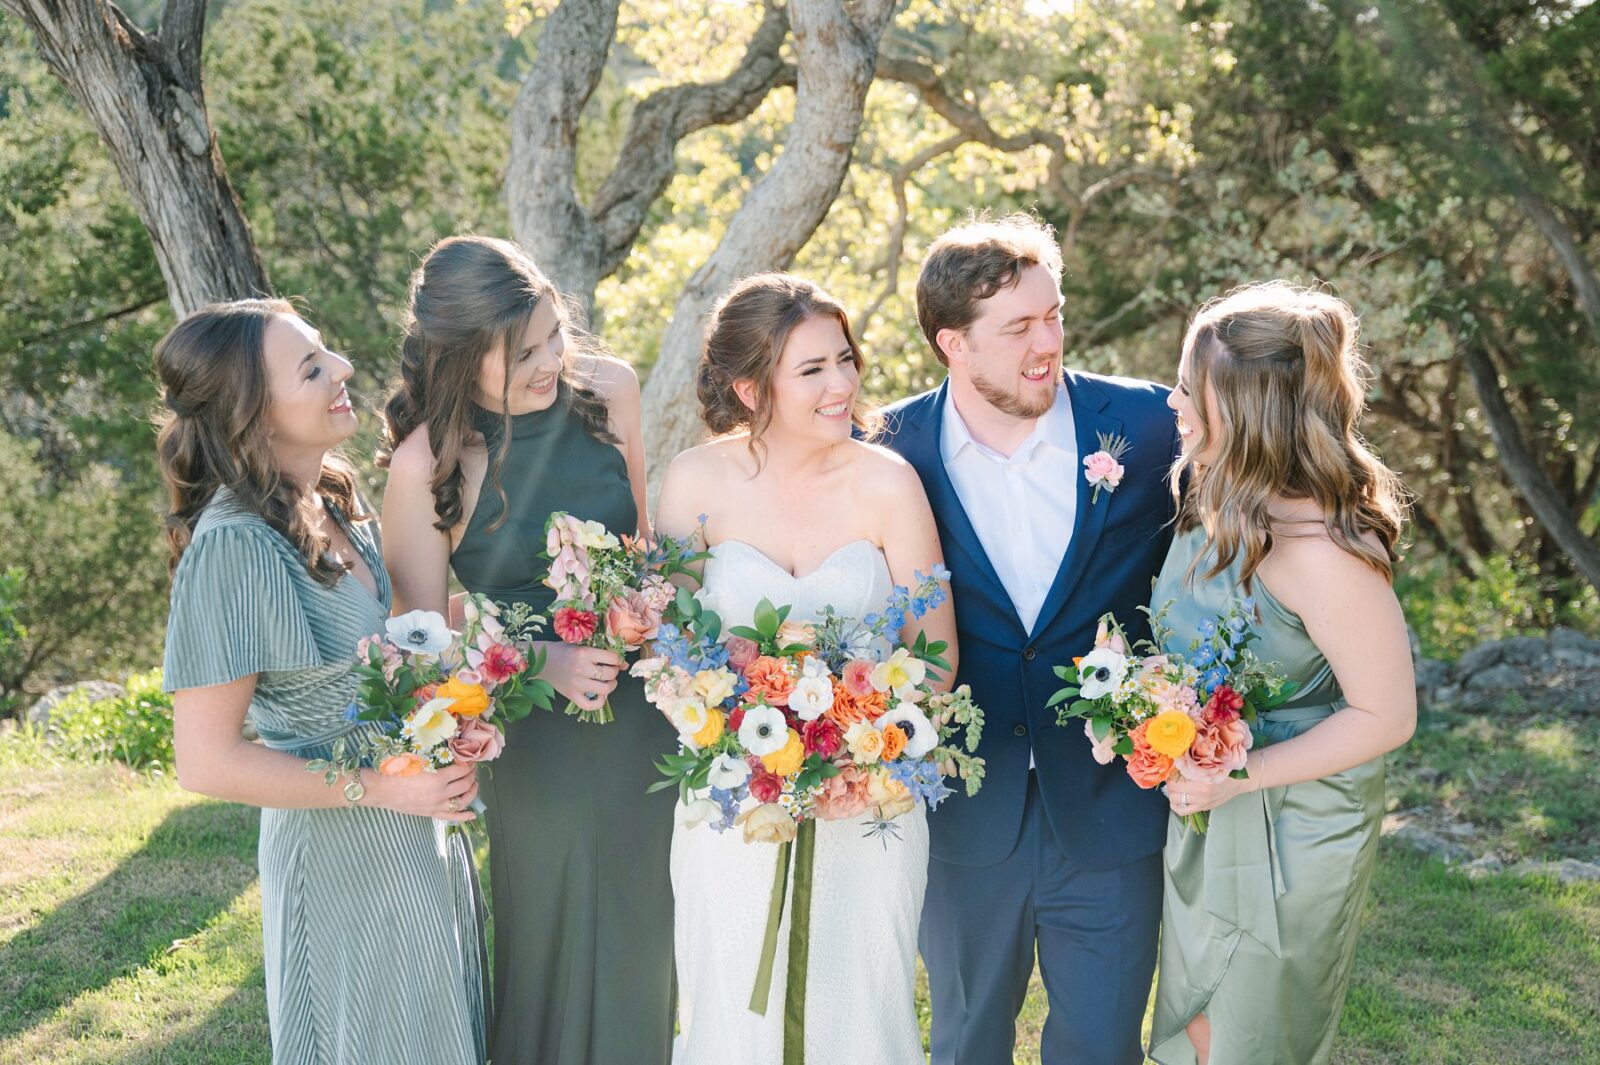 bridesmaids and brides man, bridal portraits, wedding at the videre estate venue, wimberley, photos by Tara Lyons Photography, Perry's Petal, planning by sweet magnolia events